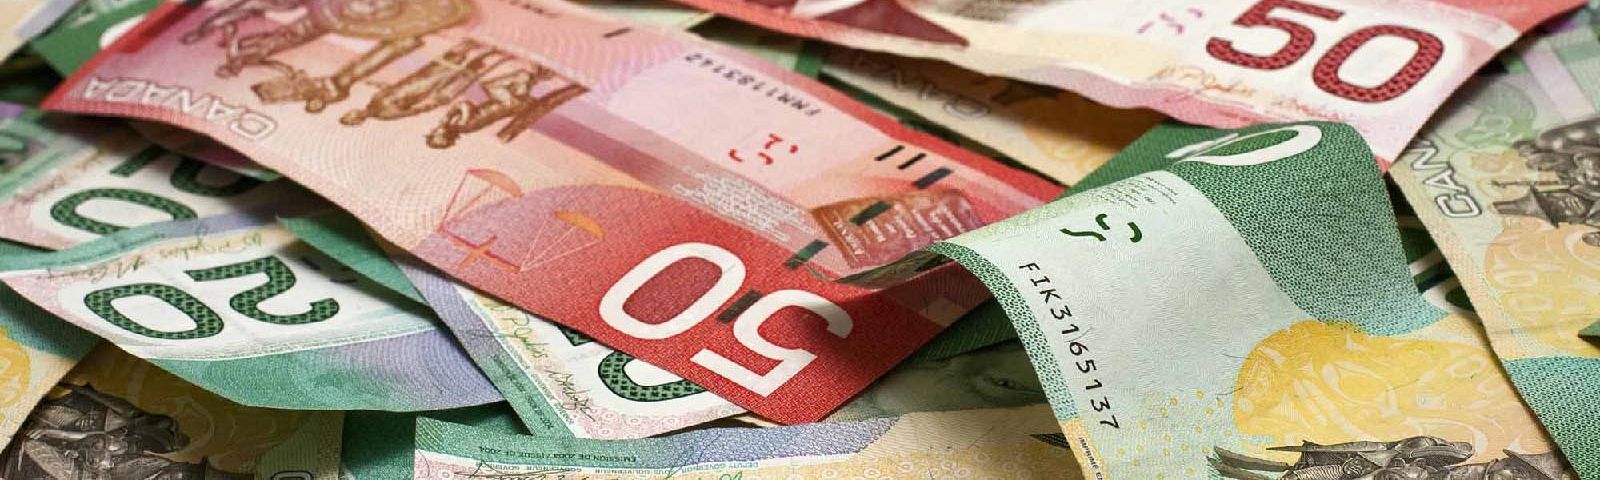 Province to probe money laundering in real estate, luxury car industries